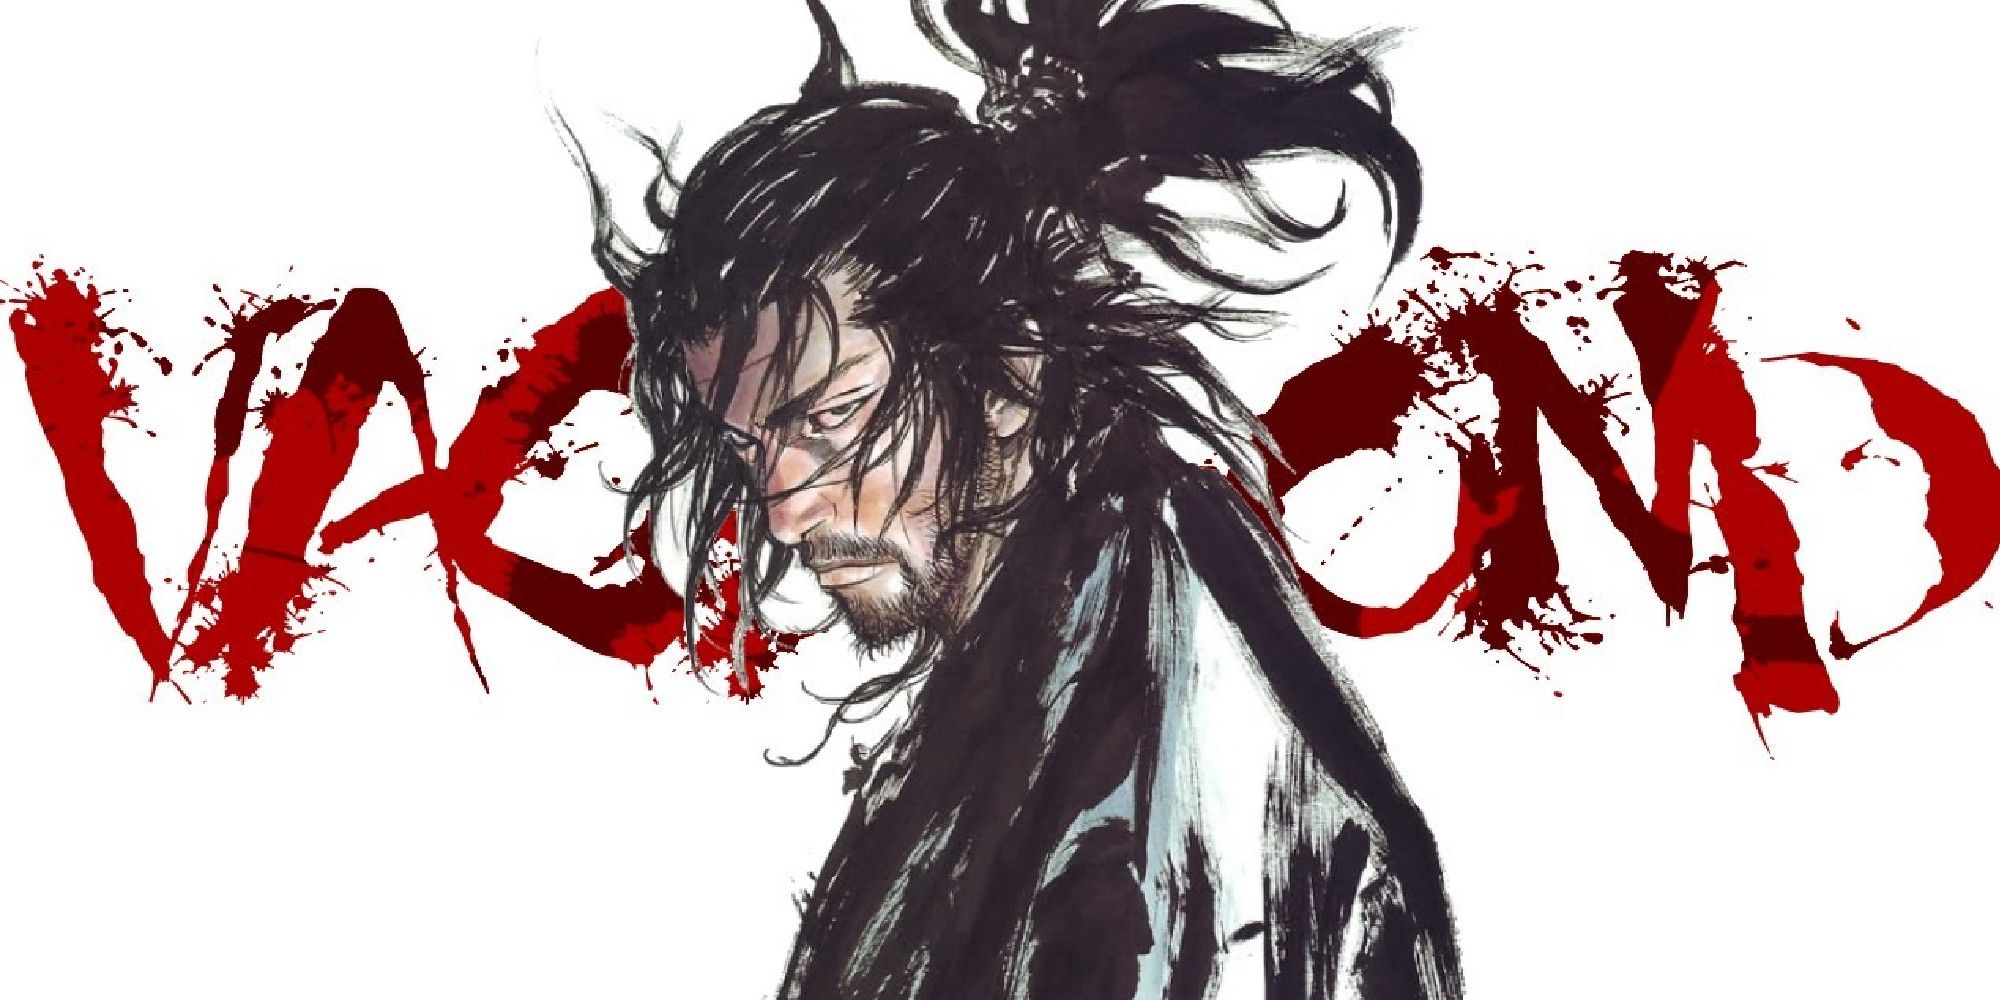 Musashi Miyamoto from Vagabond in official, full colored artwork featuring the series' title card.